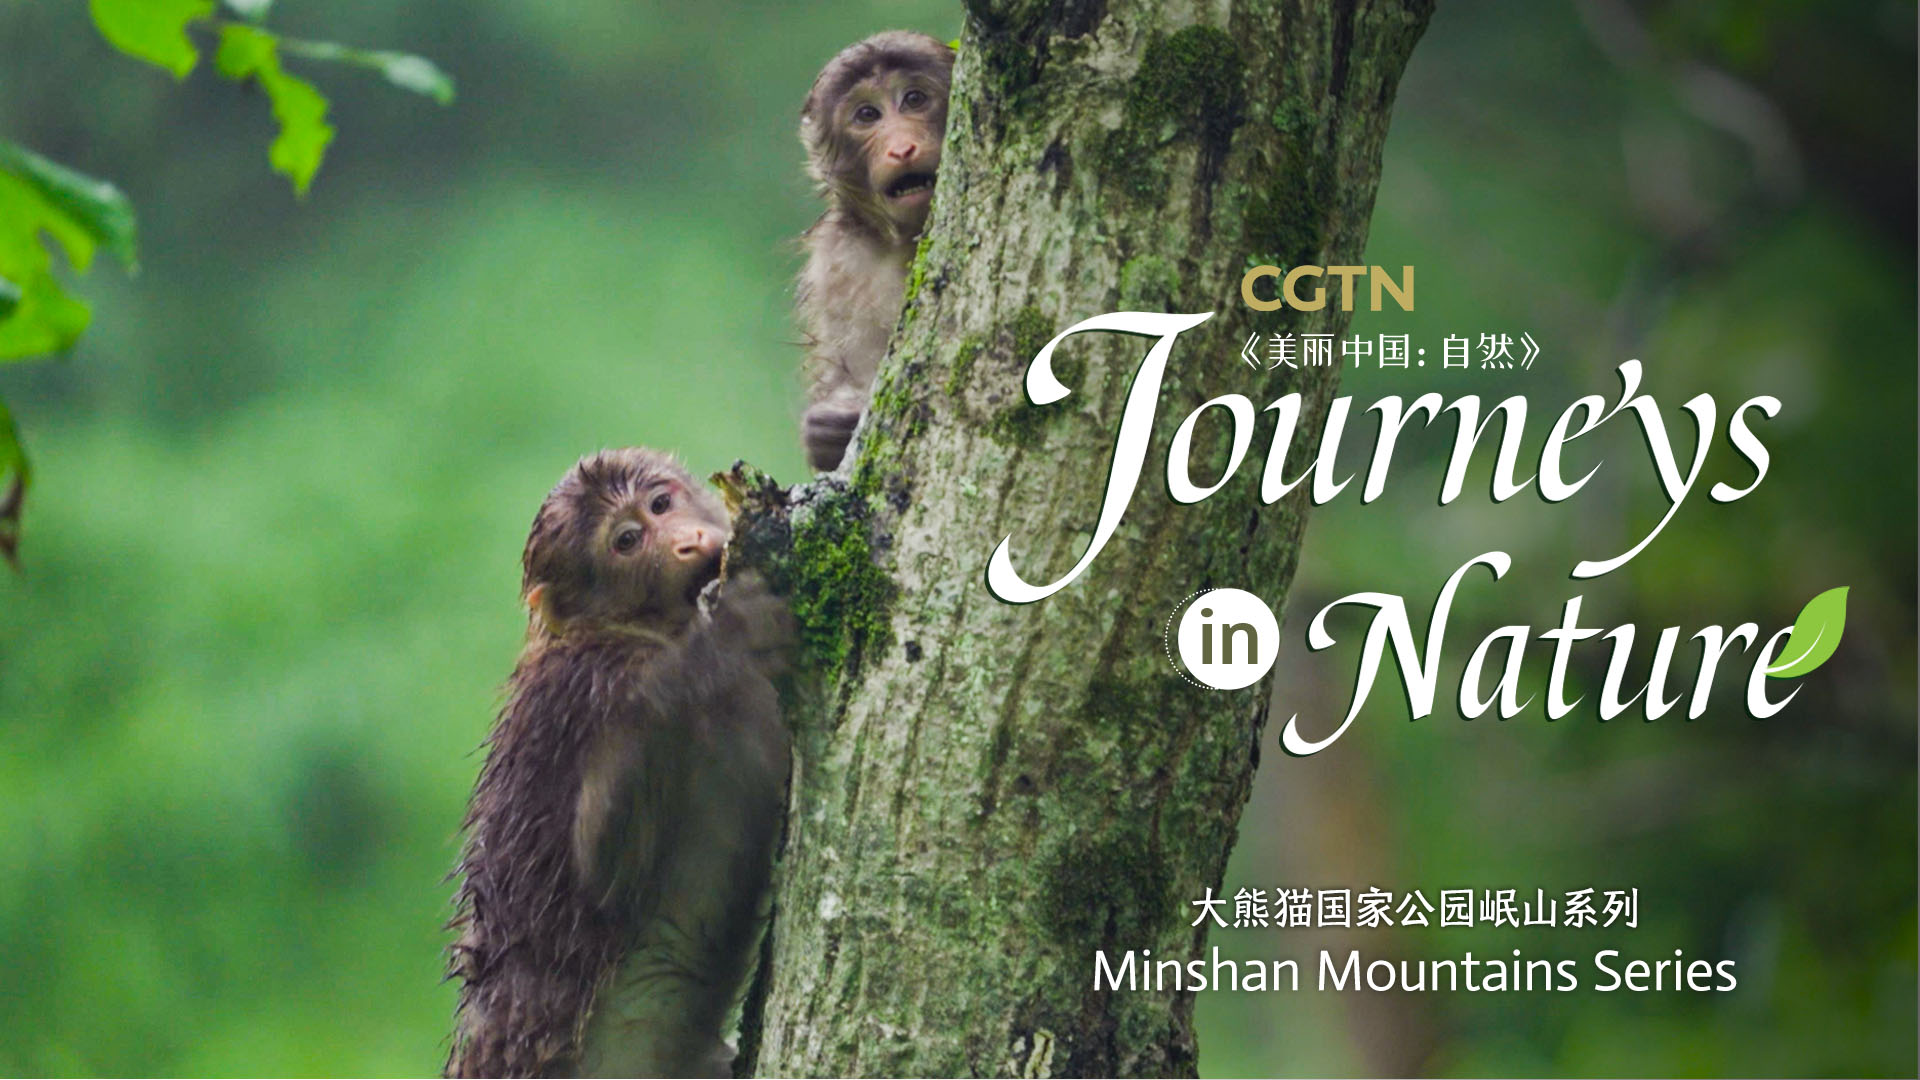 CGTN Nature presents 'Journeys in Nature: Minshan Mountains Series'